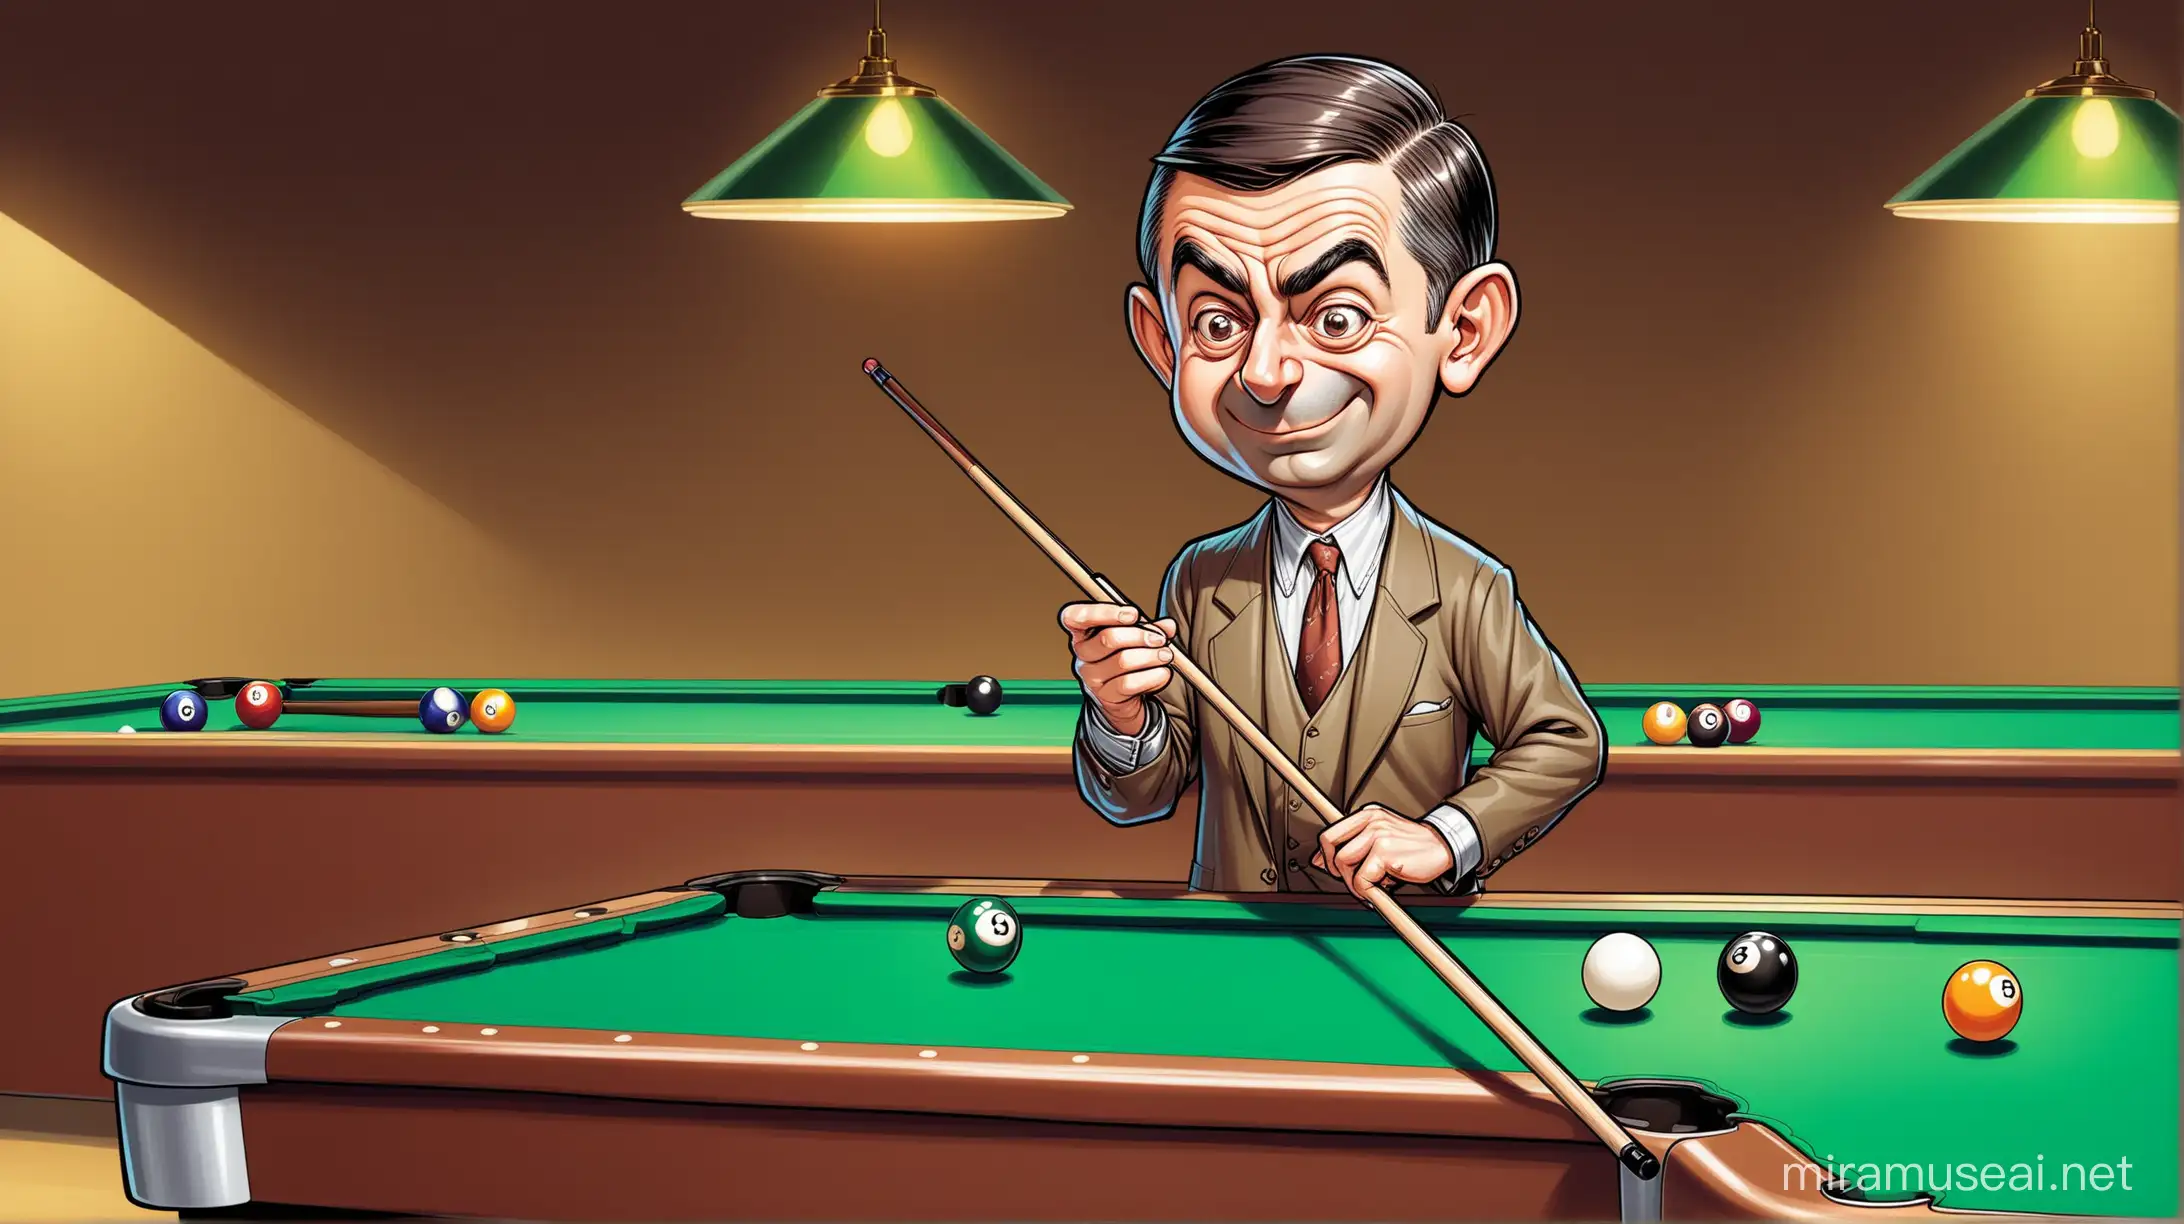 A cartoon of Mr. Bean standing next to a pool table With a billiard stick in his hand playing billiards with a smile on his face